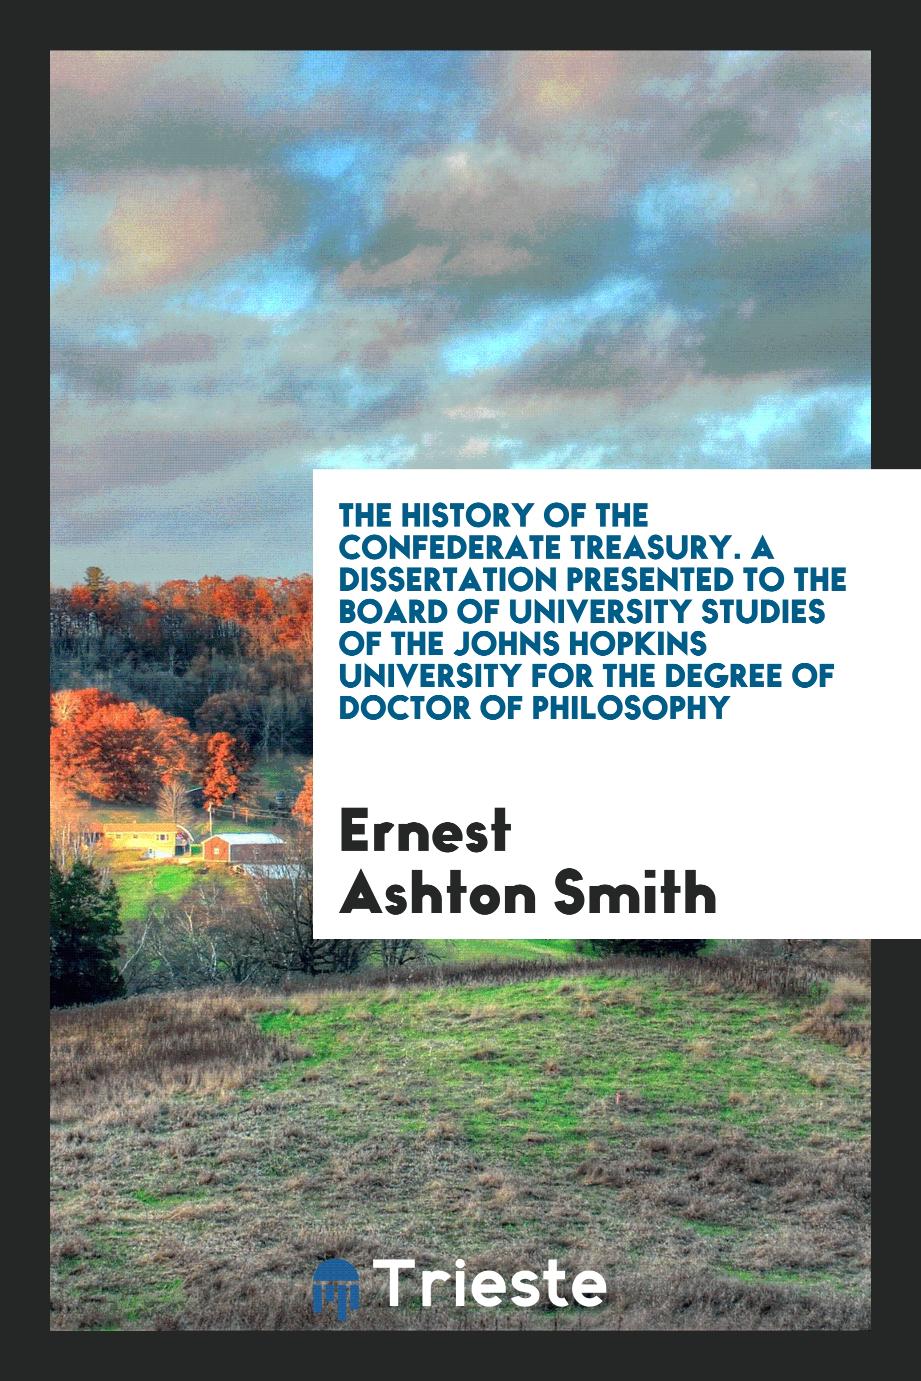 The History of the Confederate Treasury. A Dissertation Presented to the Board of University Studies of the Johns Hopkins University for the Degree of Doctor of Philosophy